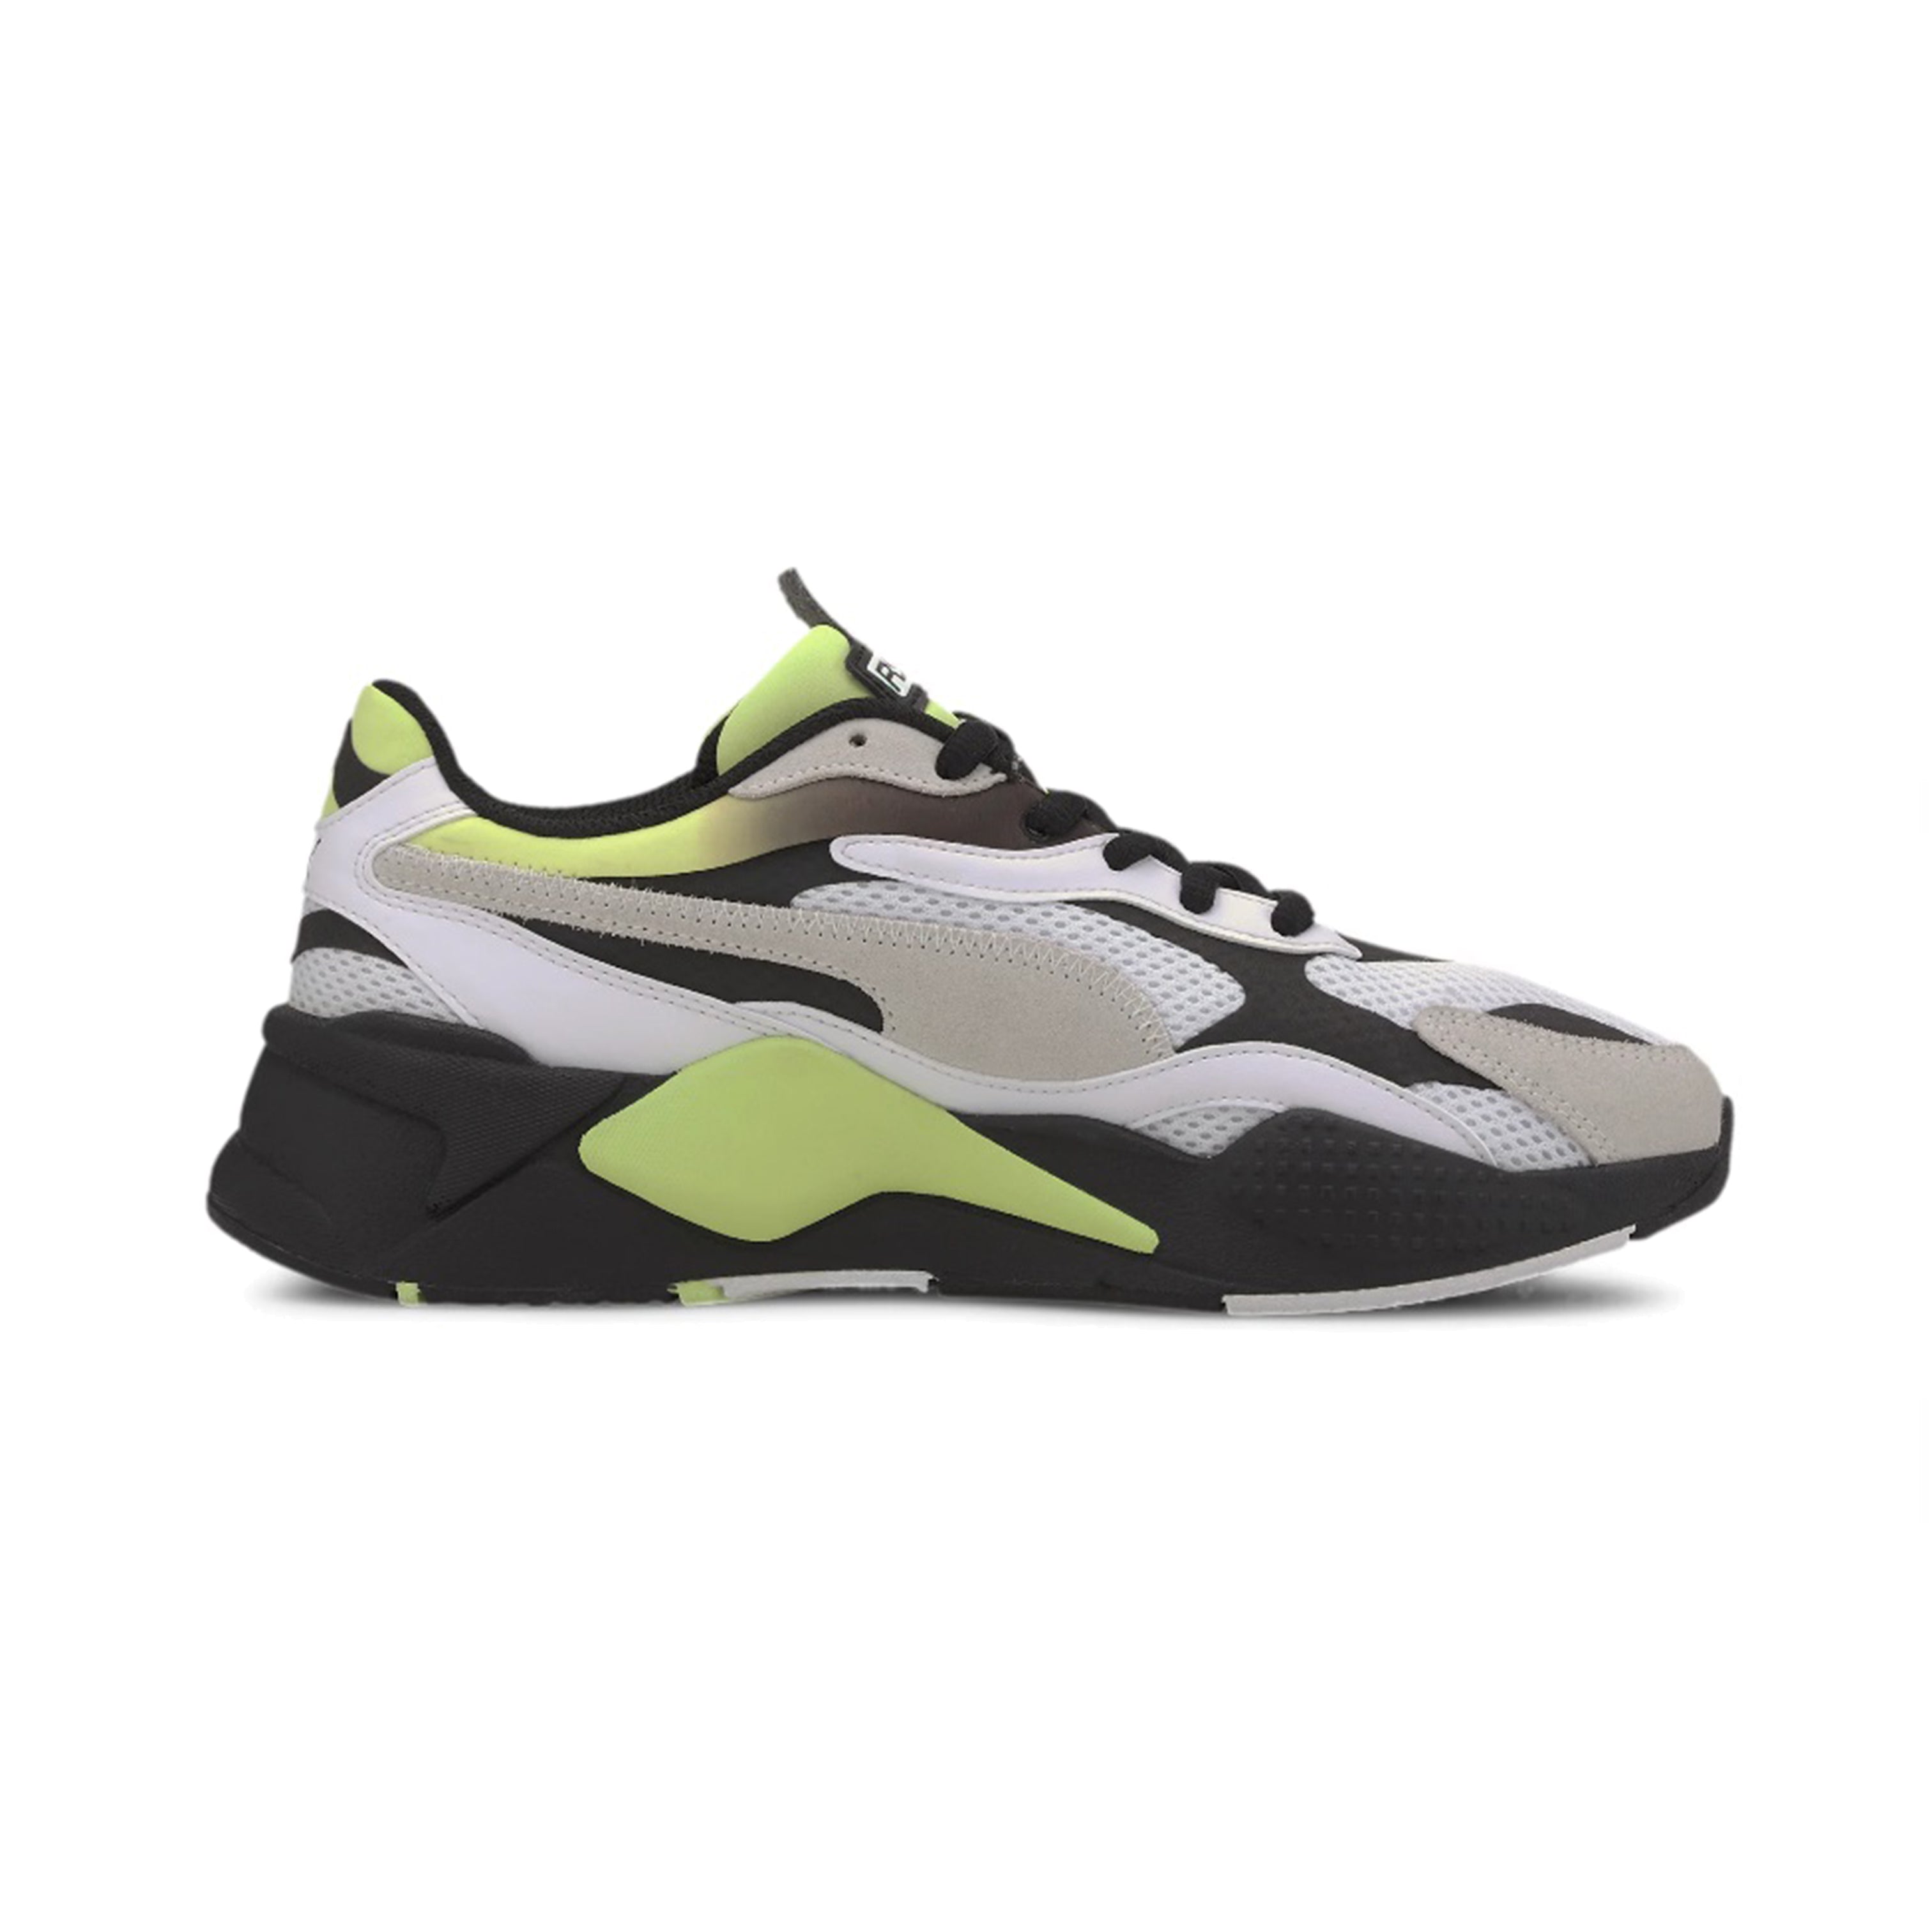 Puma RSX3 WR Neofade Sneakers 373377 02 – Action Wear